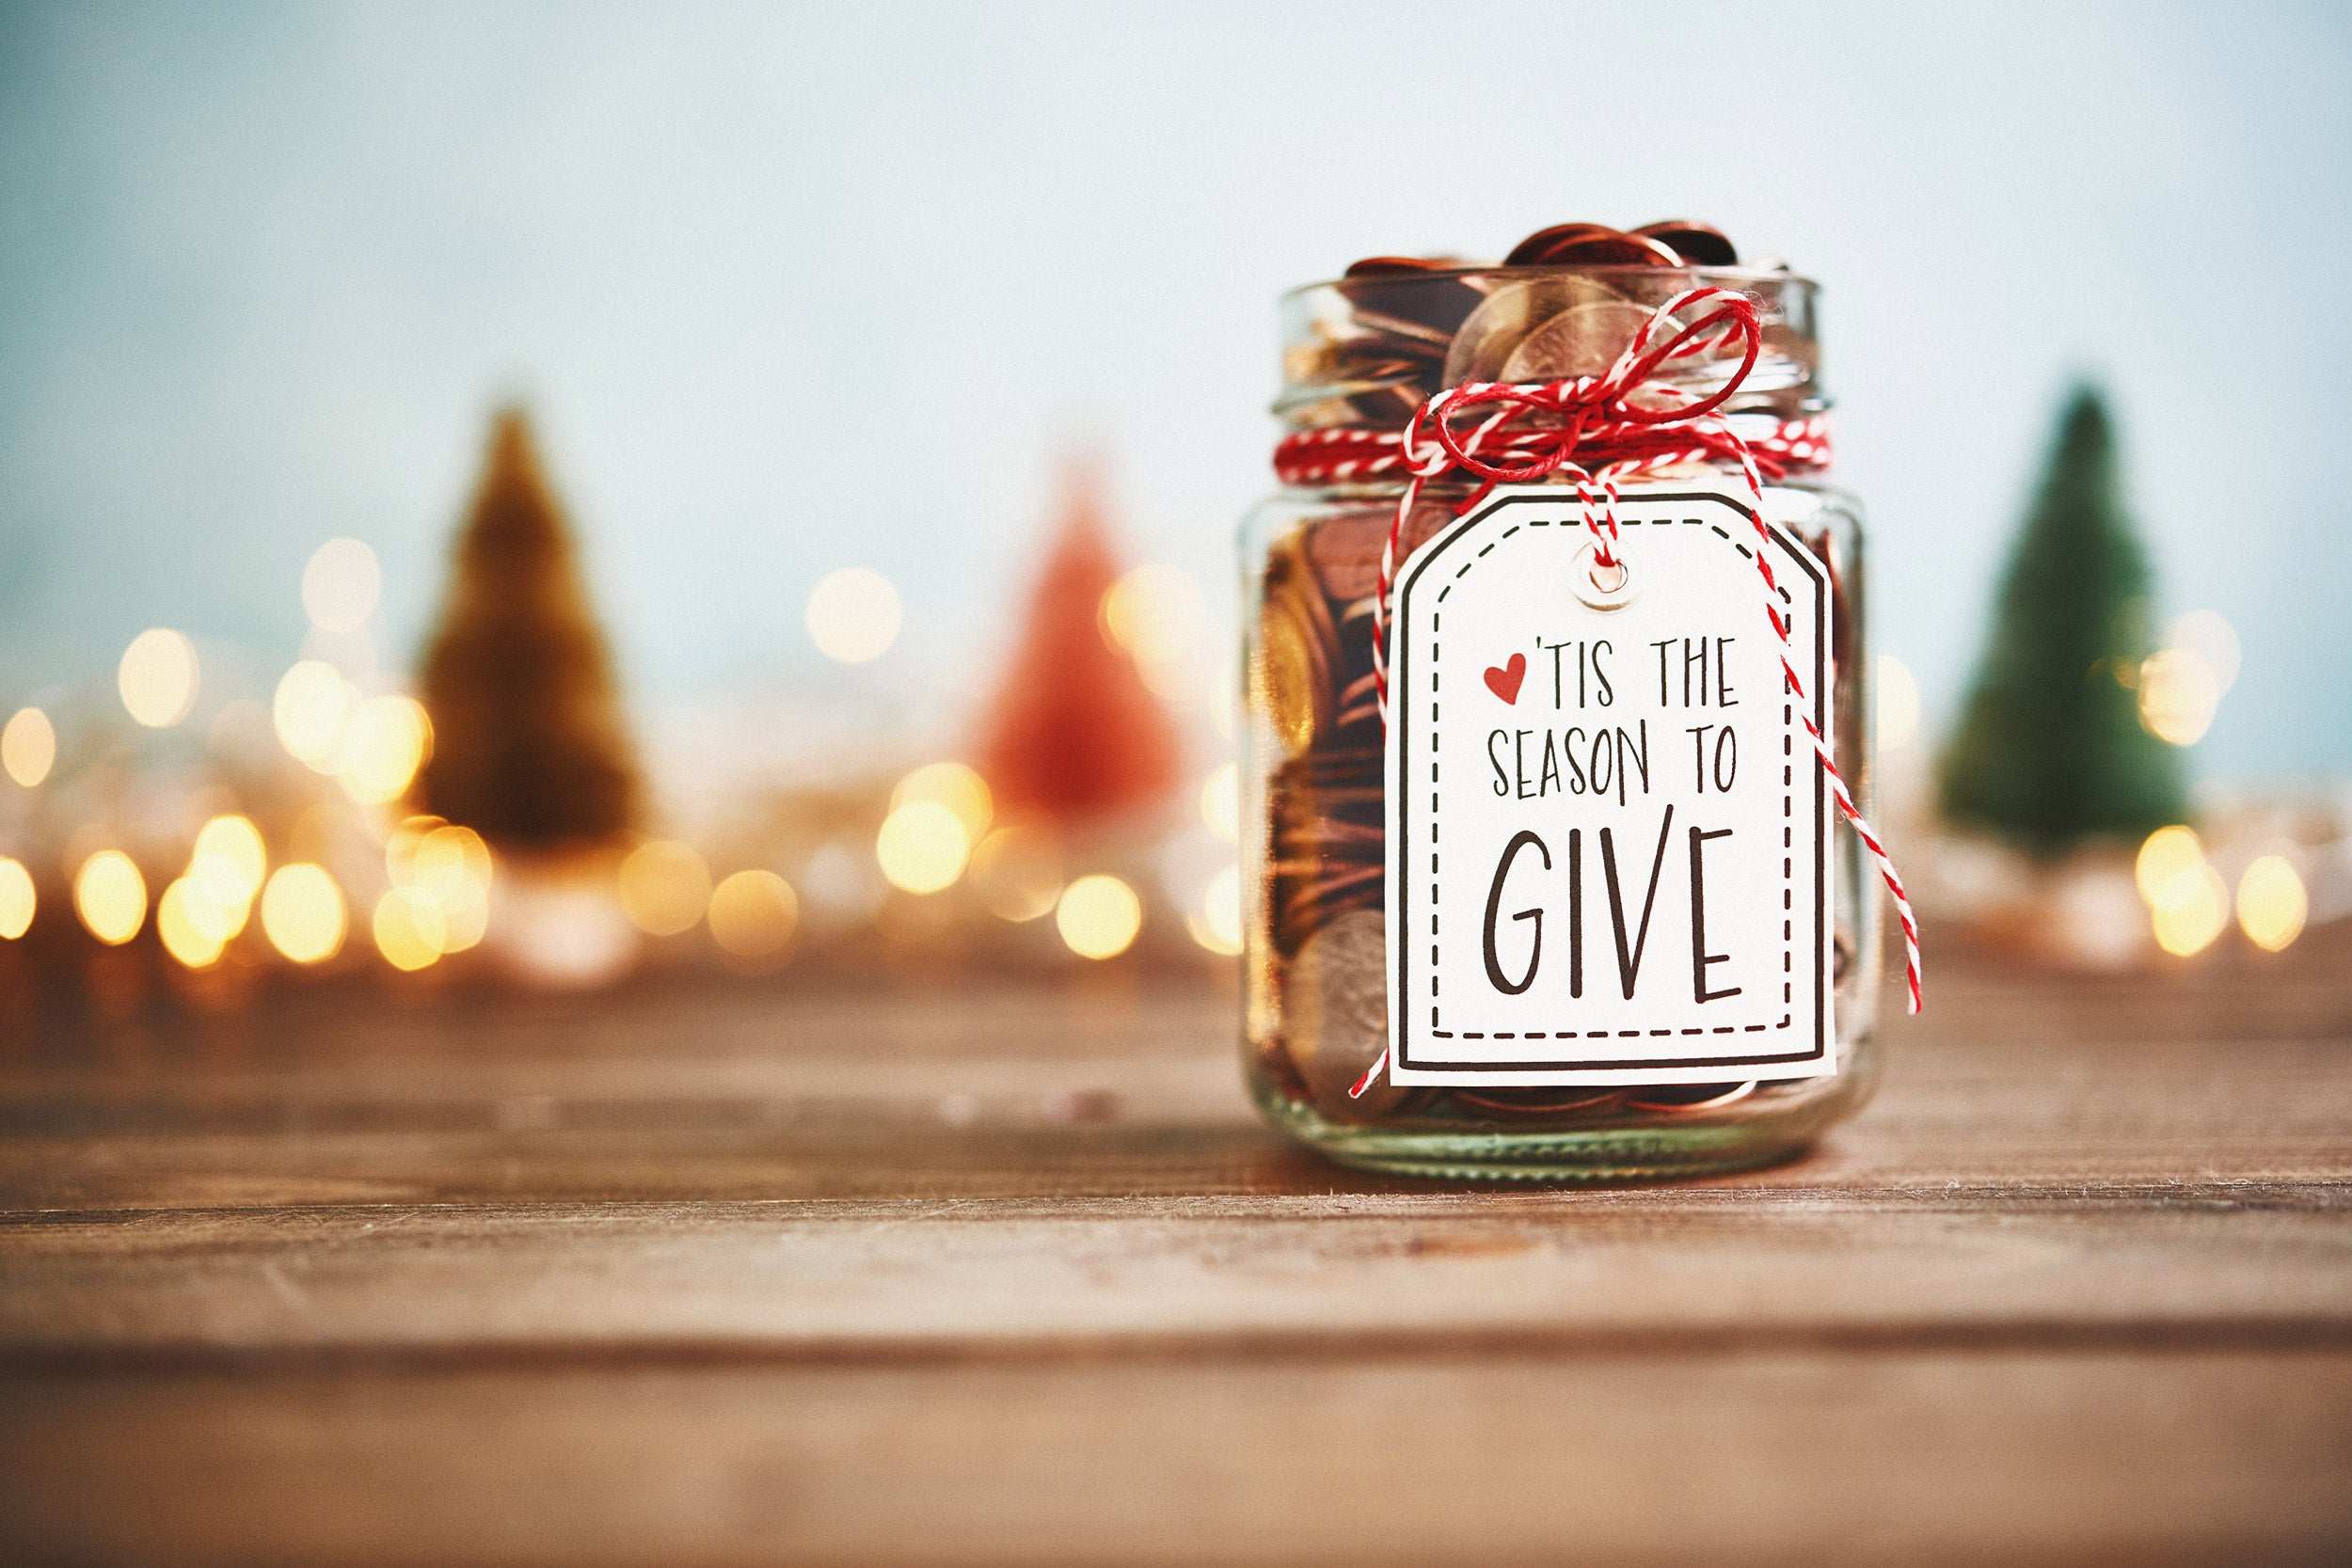 It's the season to give. Donation jar